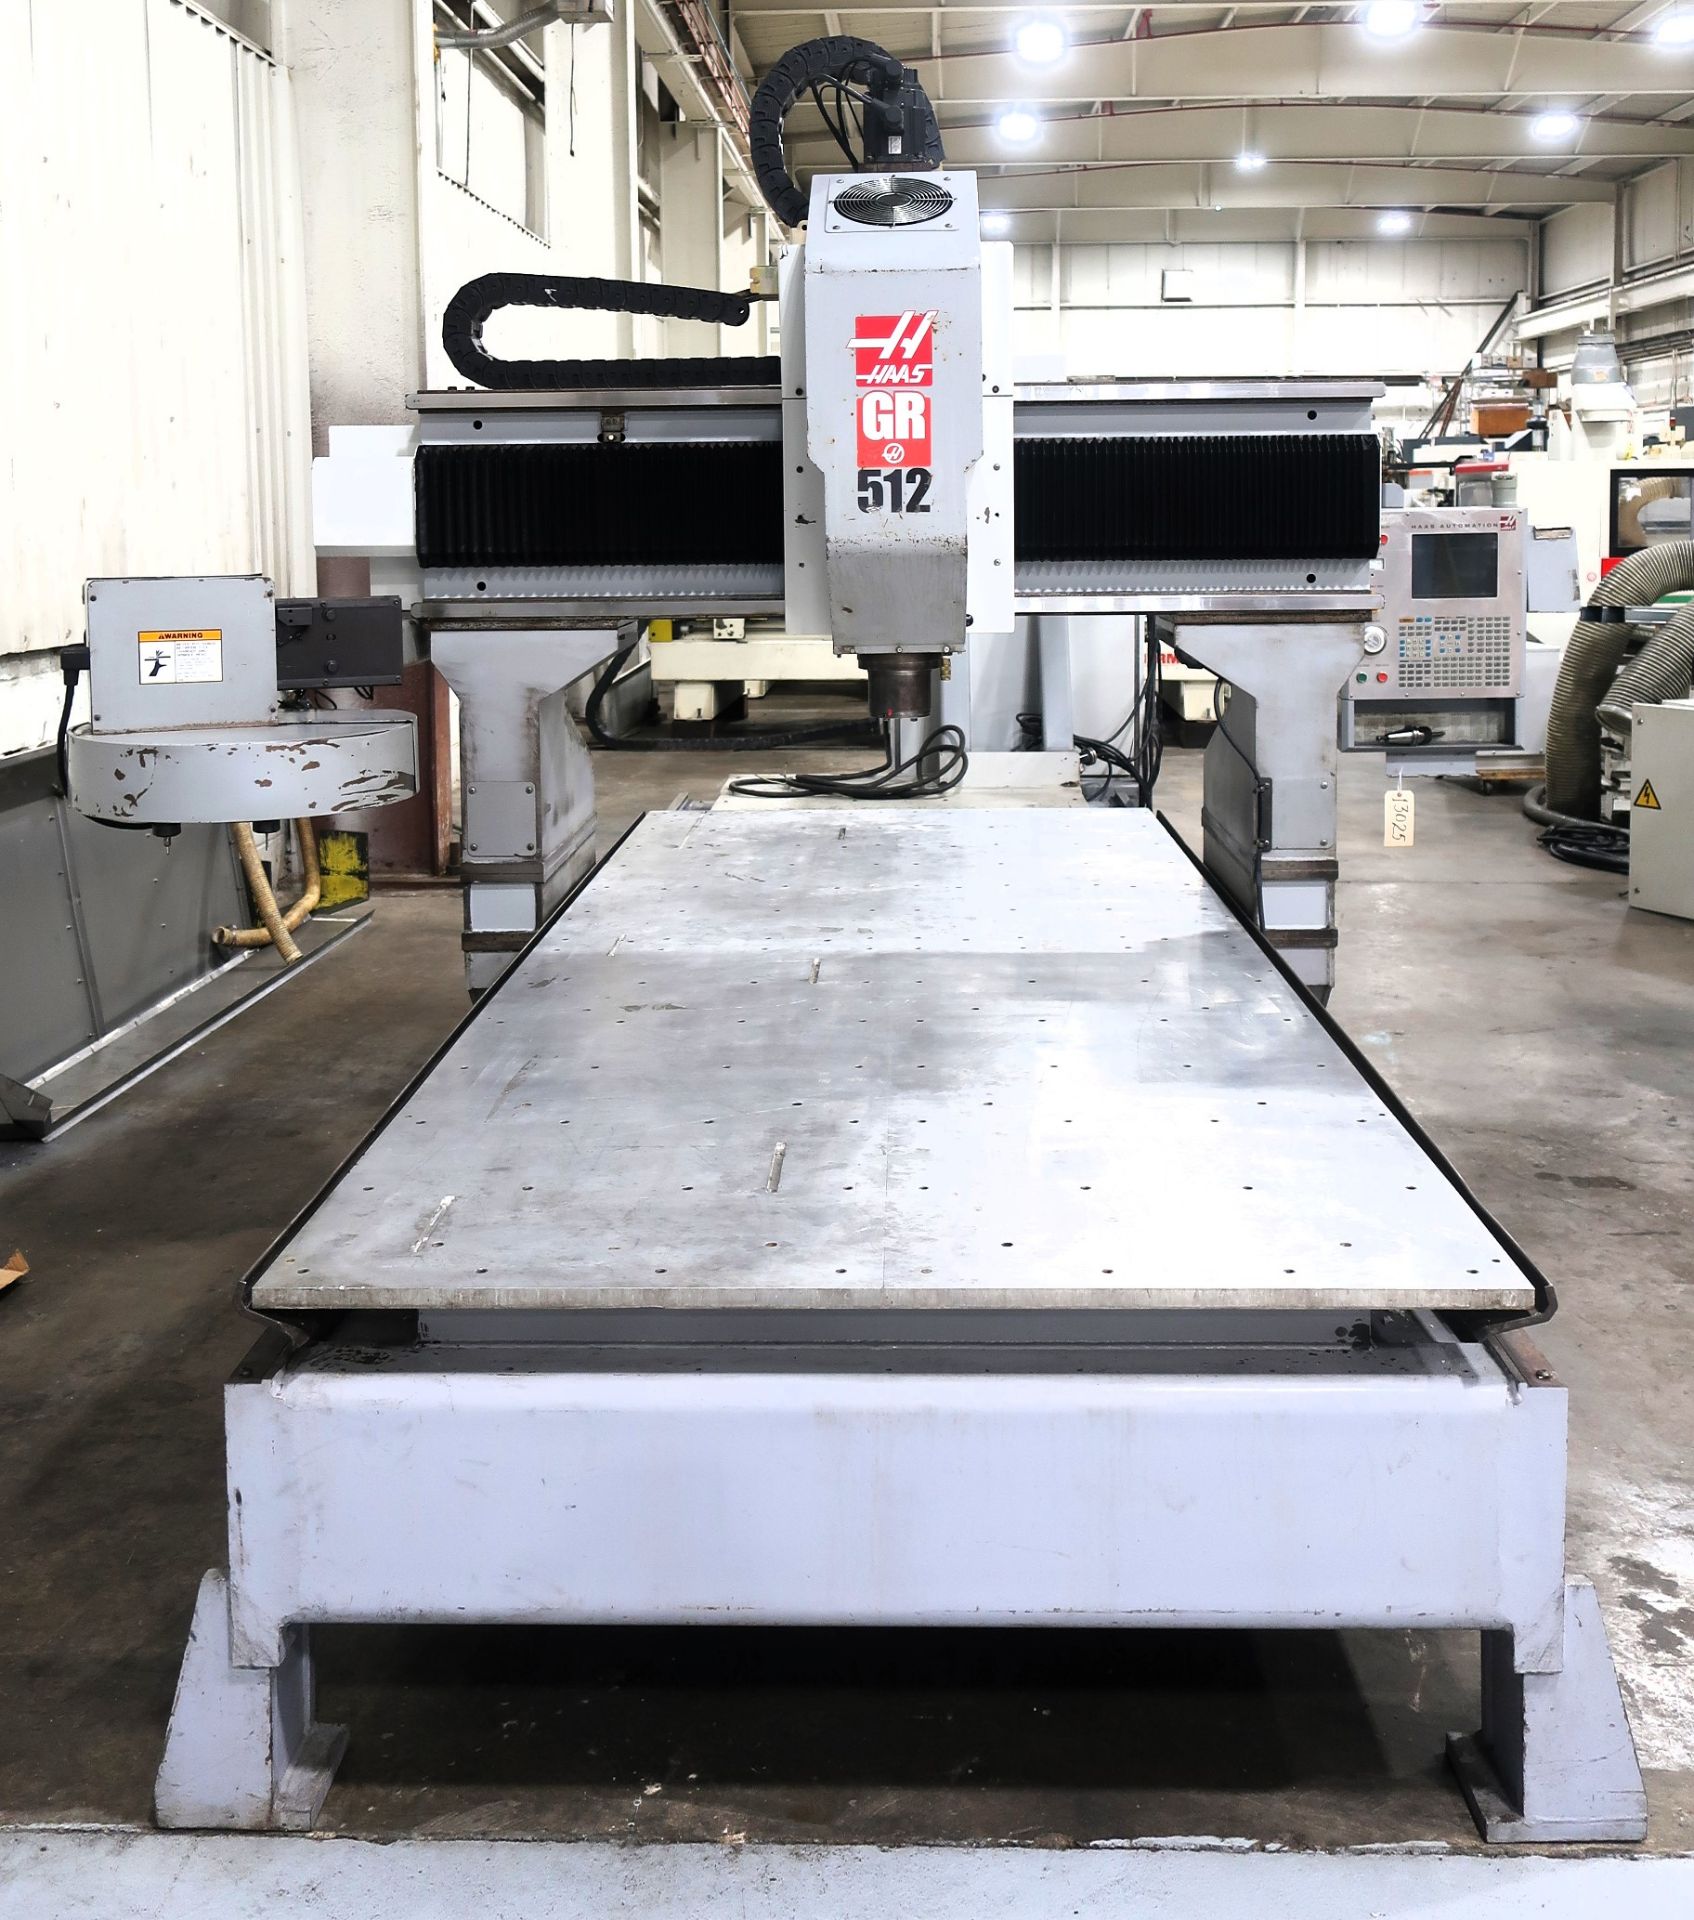 60" x 144" HAAS GR-512 CNC 3-AXIS GANTRY ROUTER/VERTICAL MACHINING CENTER, S/N 43675, New 2005